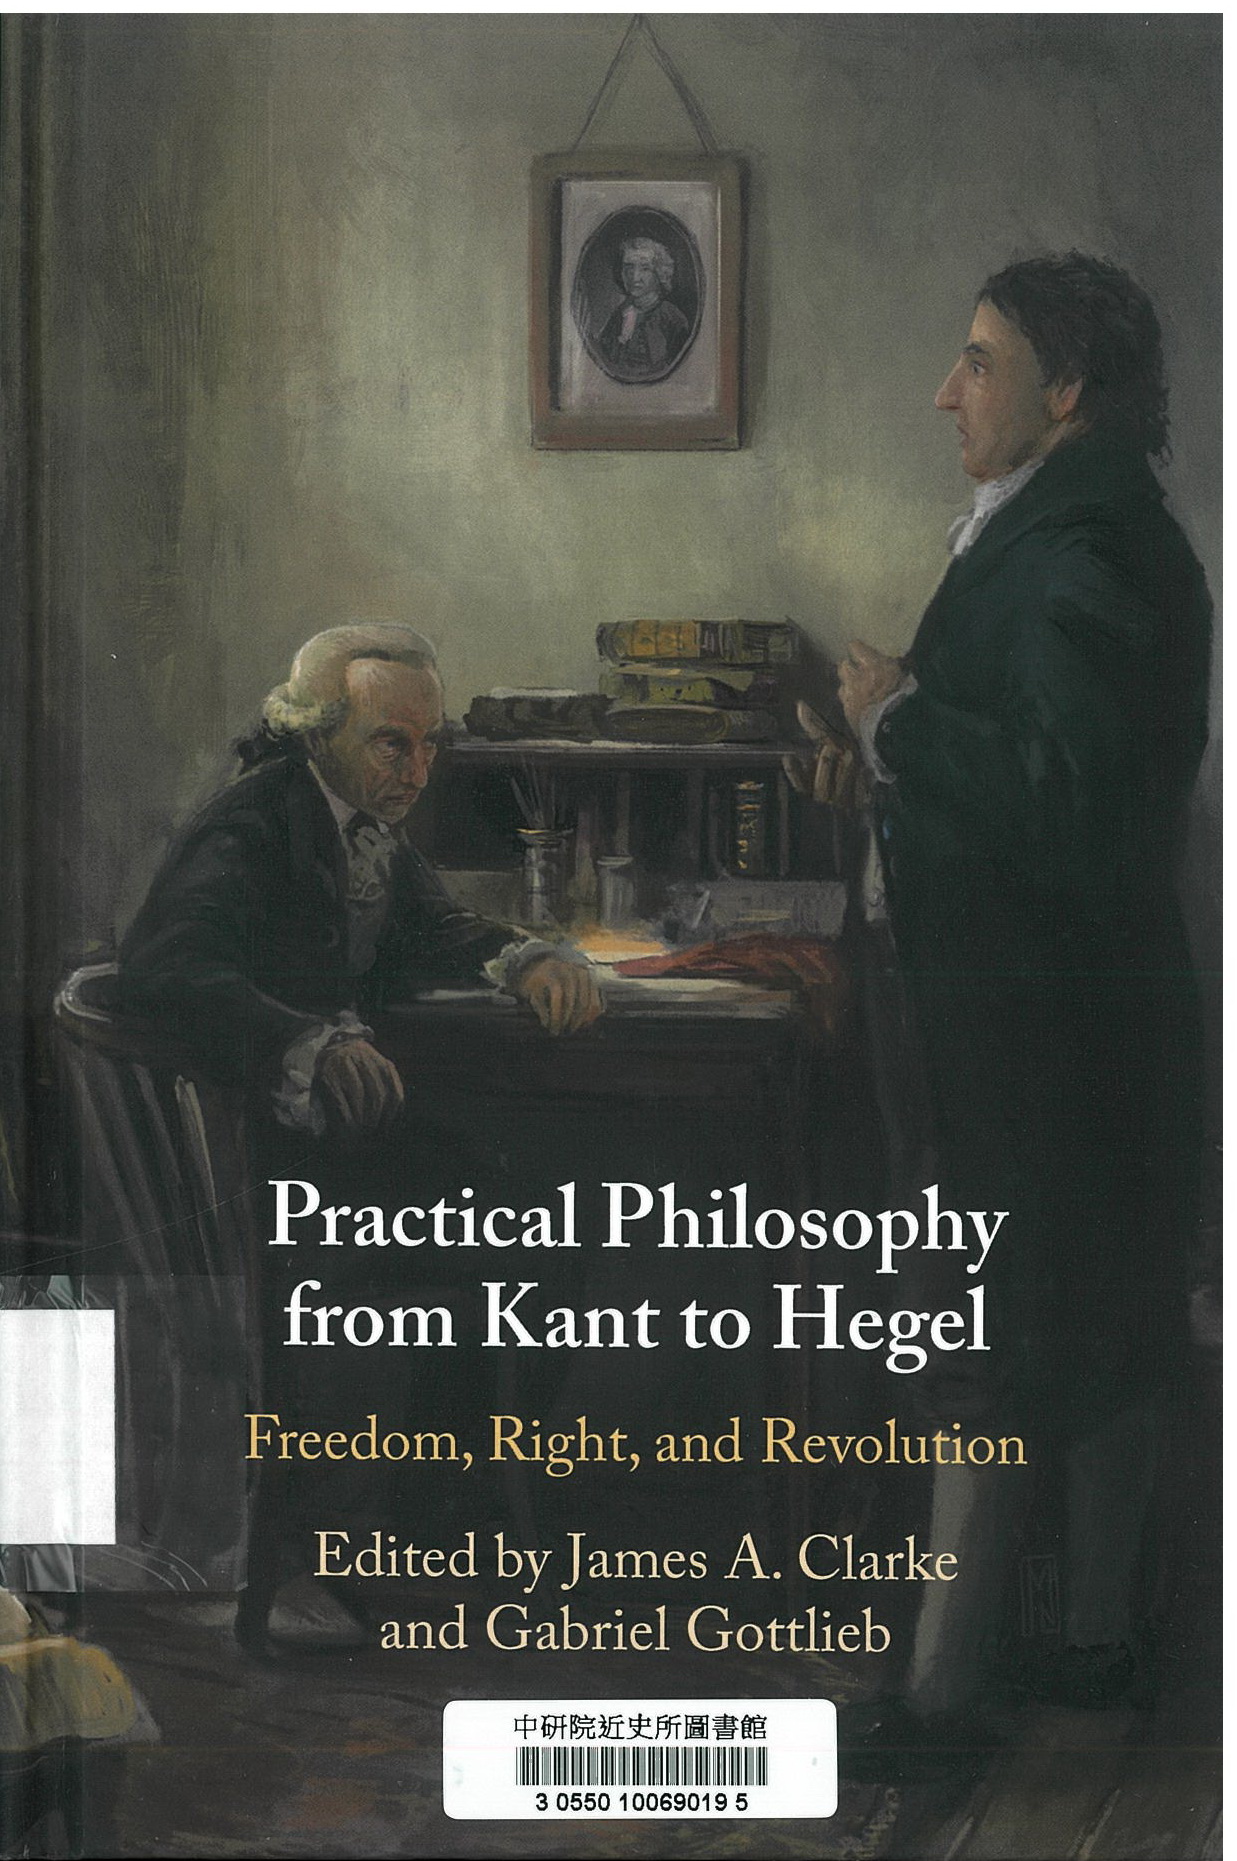 Practical philosophy from Kant to Hegel : freedom, right, and revolution